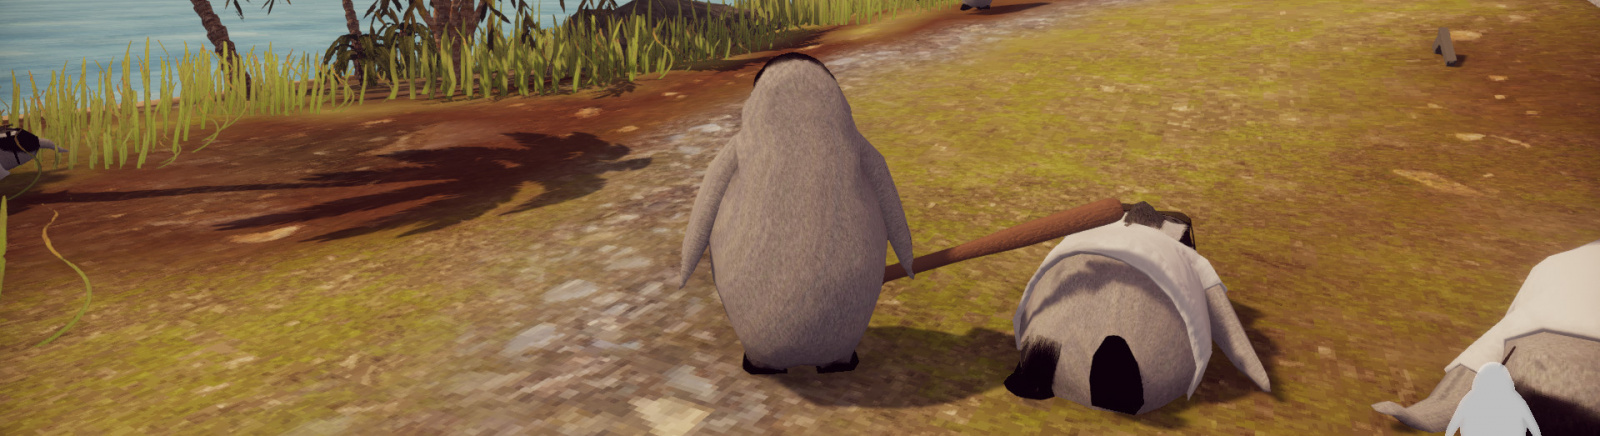 the greatest penguin heist of all time igg